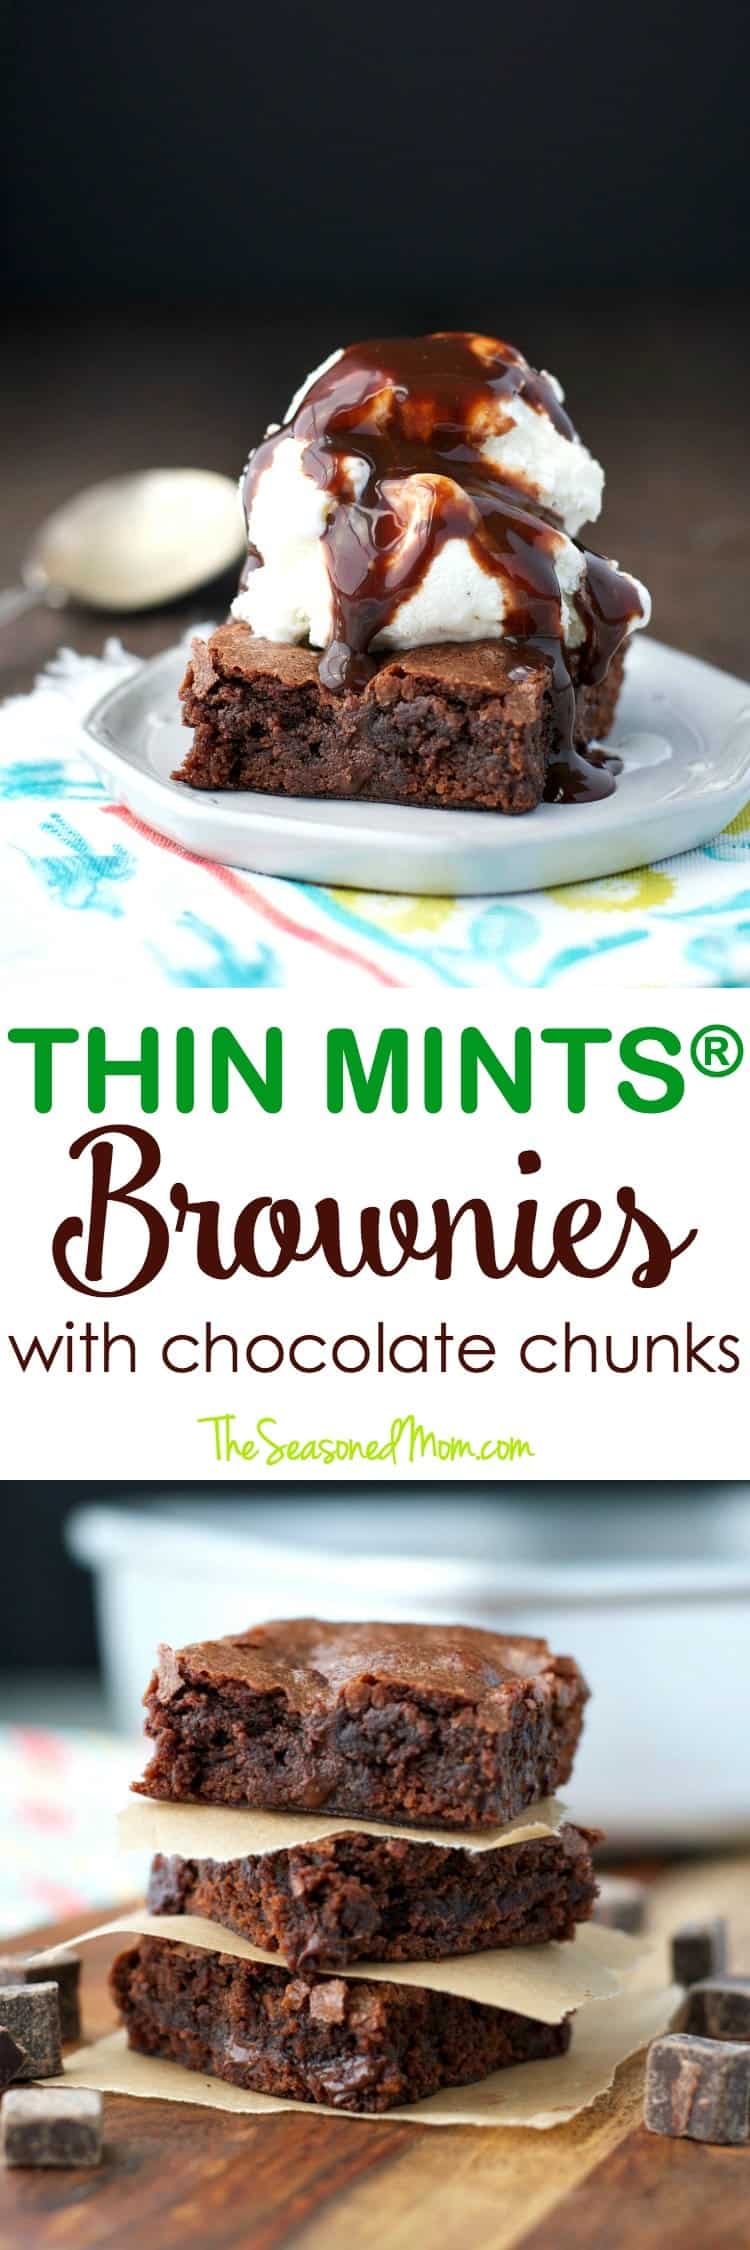 These Thin Mints® Brownies with Chocolate Chunks are a rich, chocolatey, and oh-so-decadent dessert! Best of all? They're made with a shortcut for quick and easy baking!